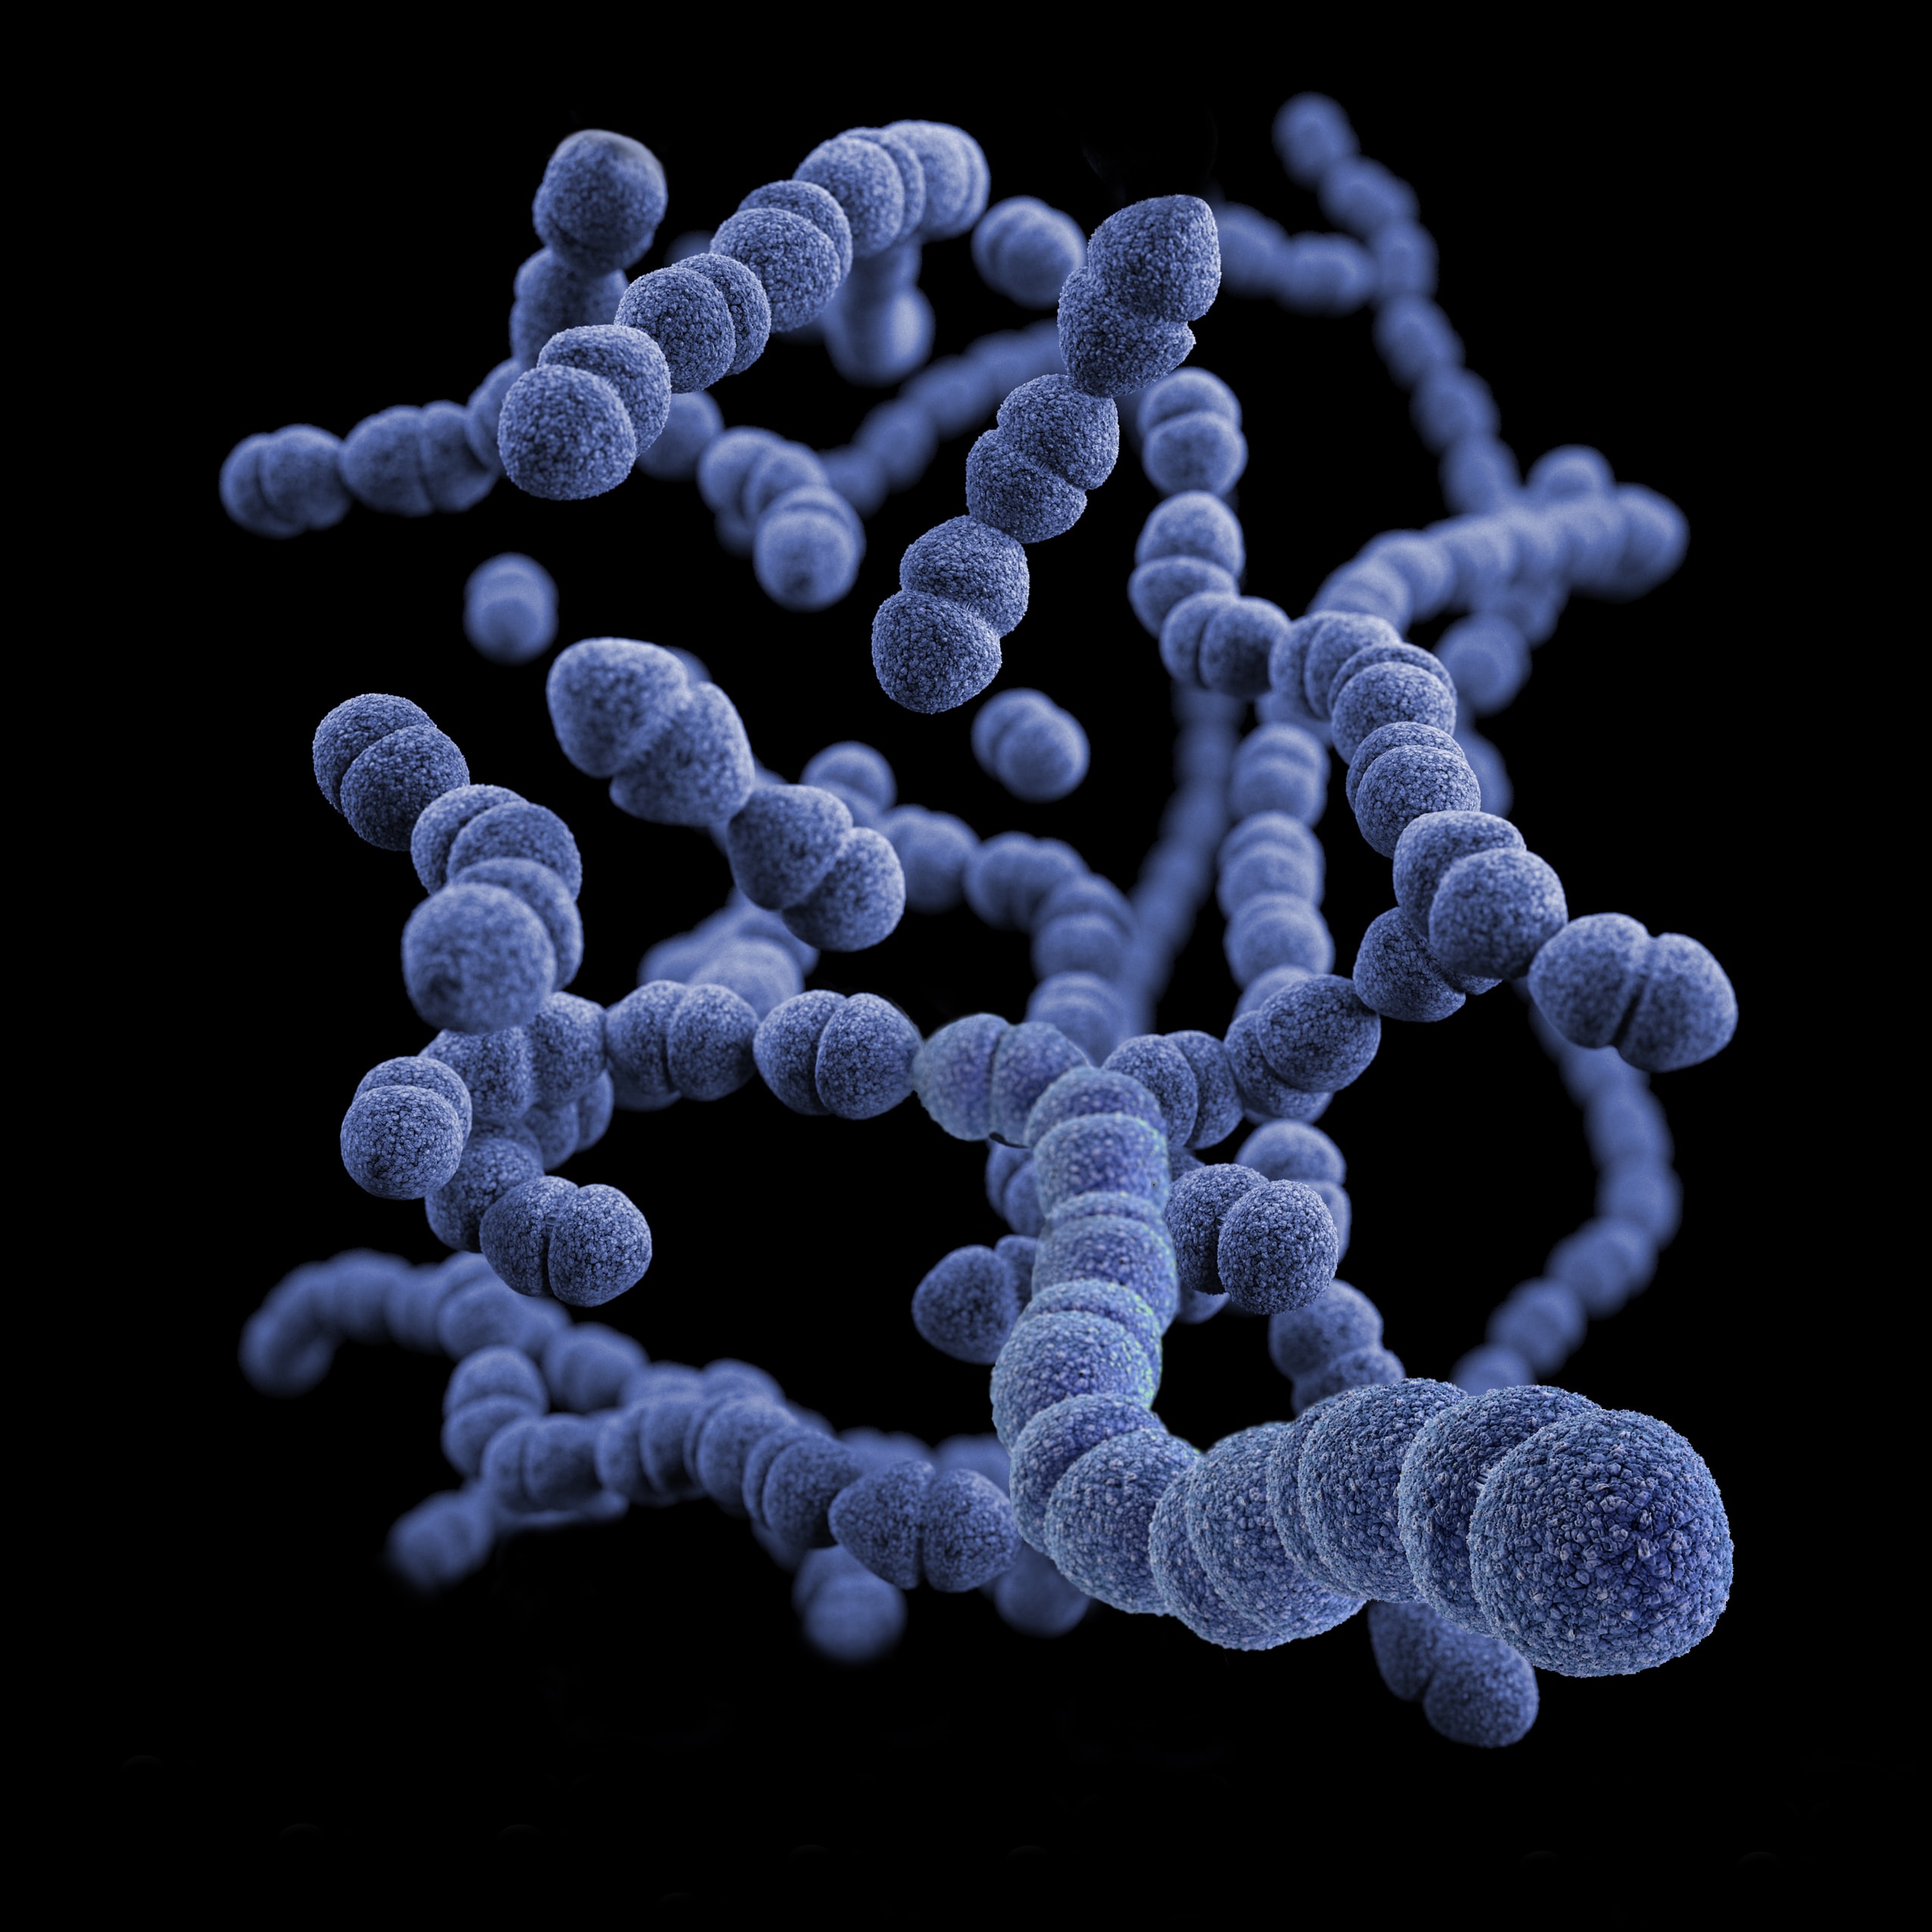 HD rendering of blue colored bacteria